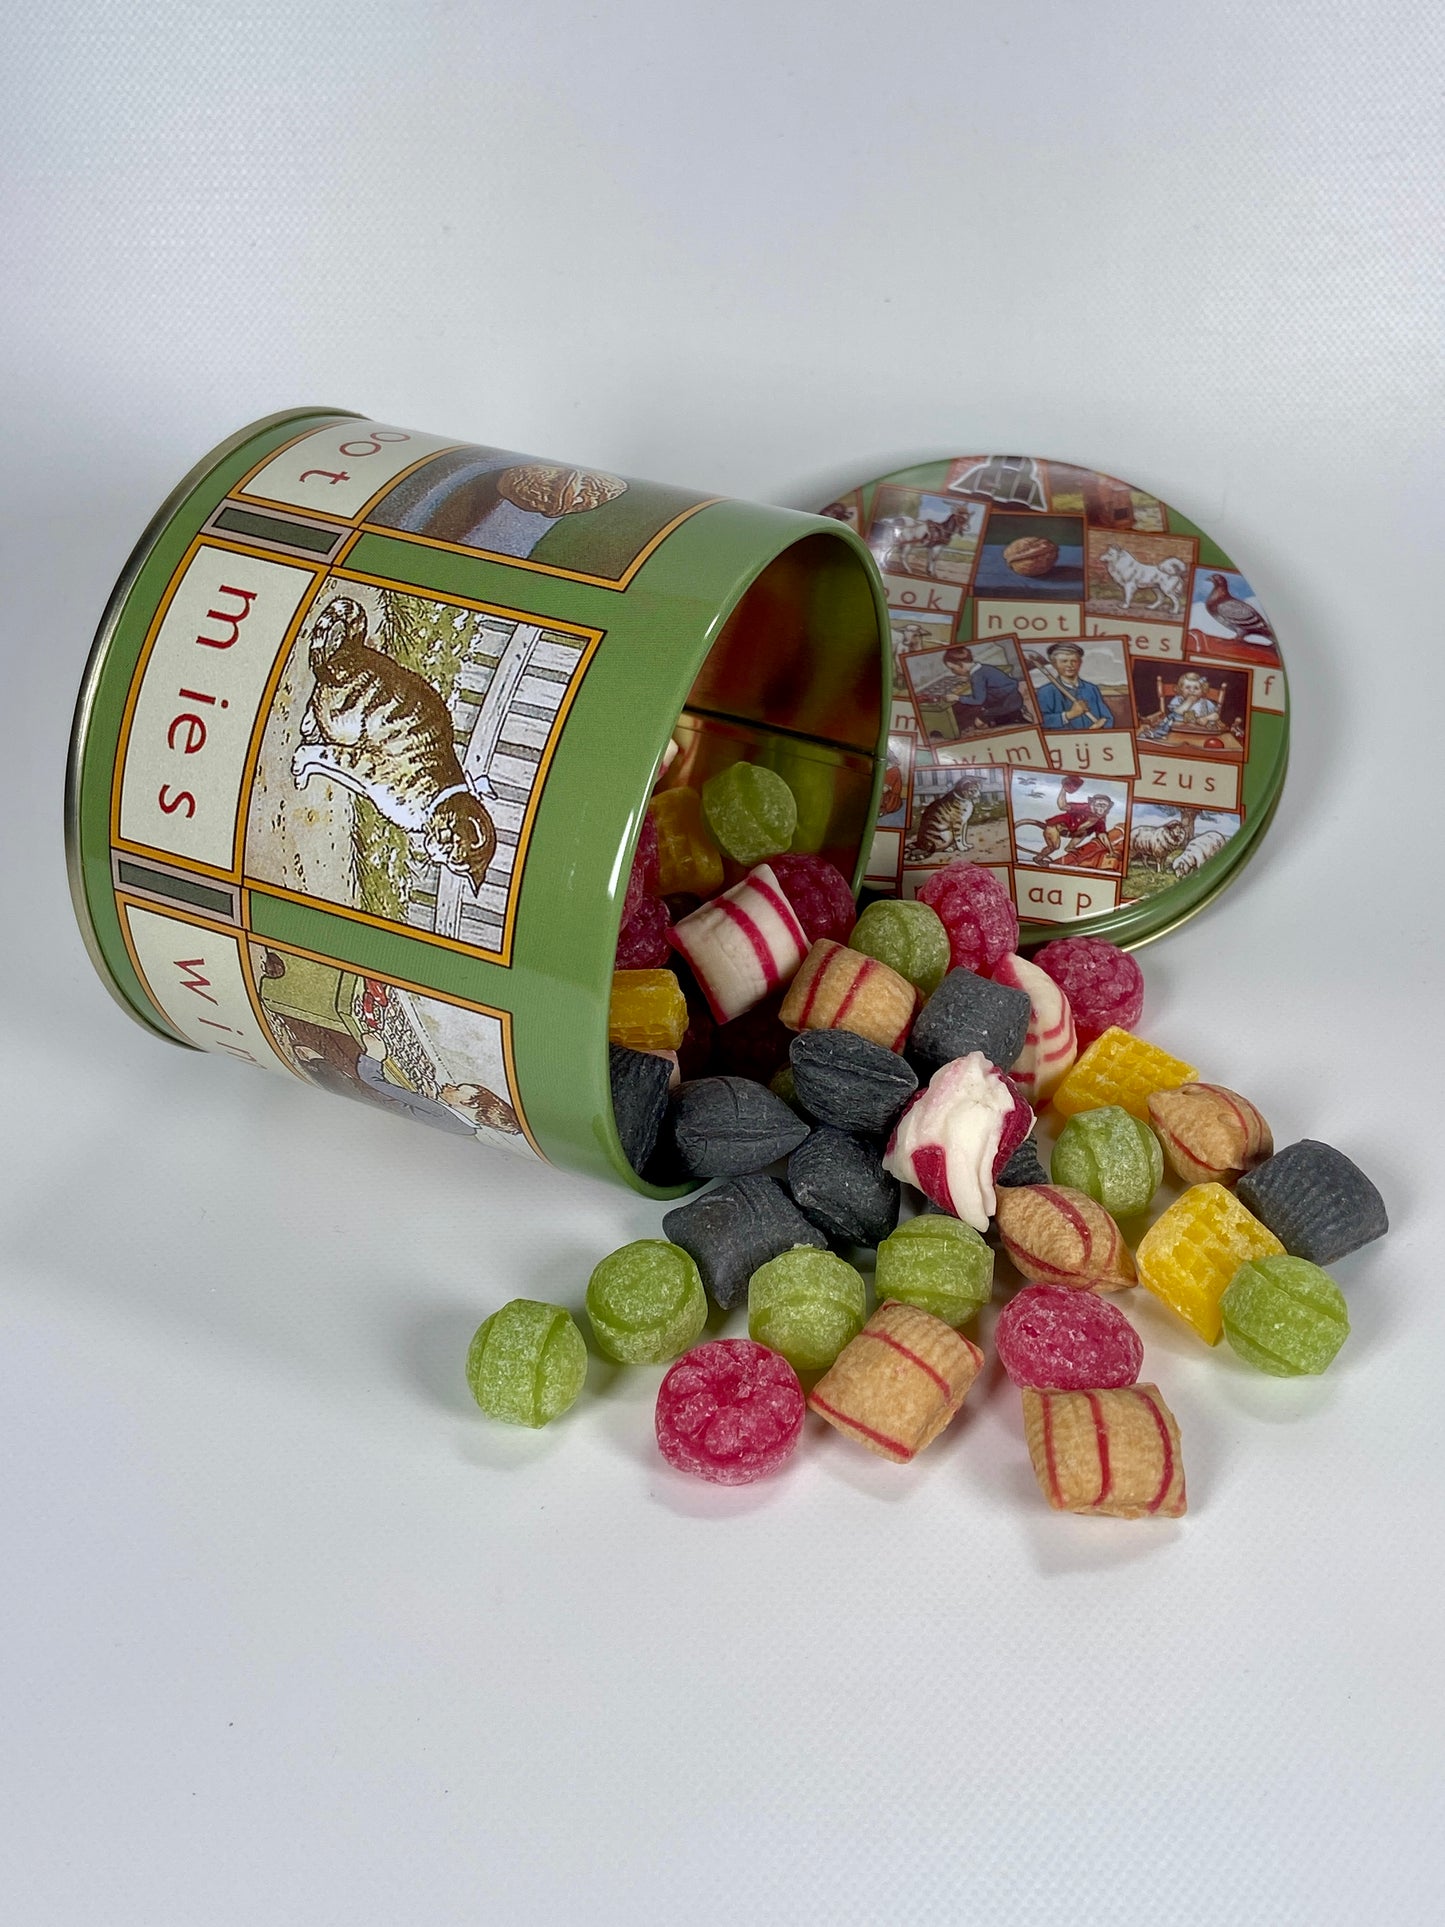 Traditional Dutch sweets in aap noot mies tin - Big BIte Dutch Treats